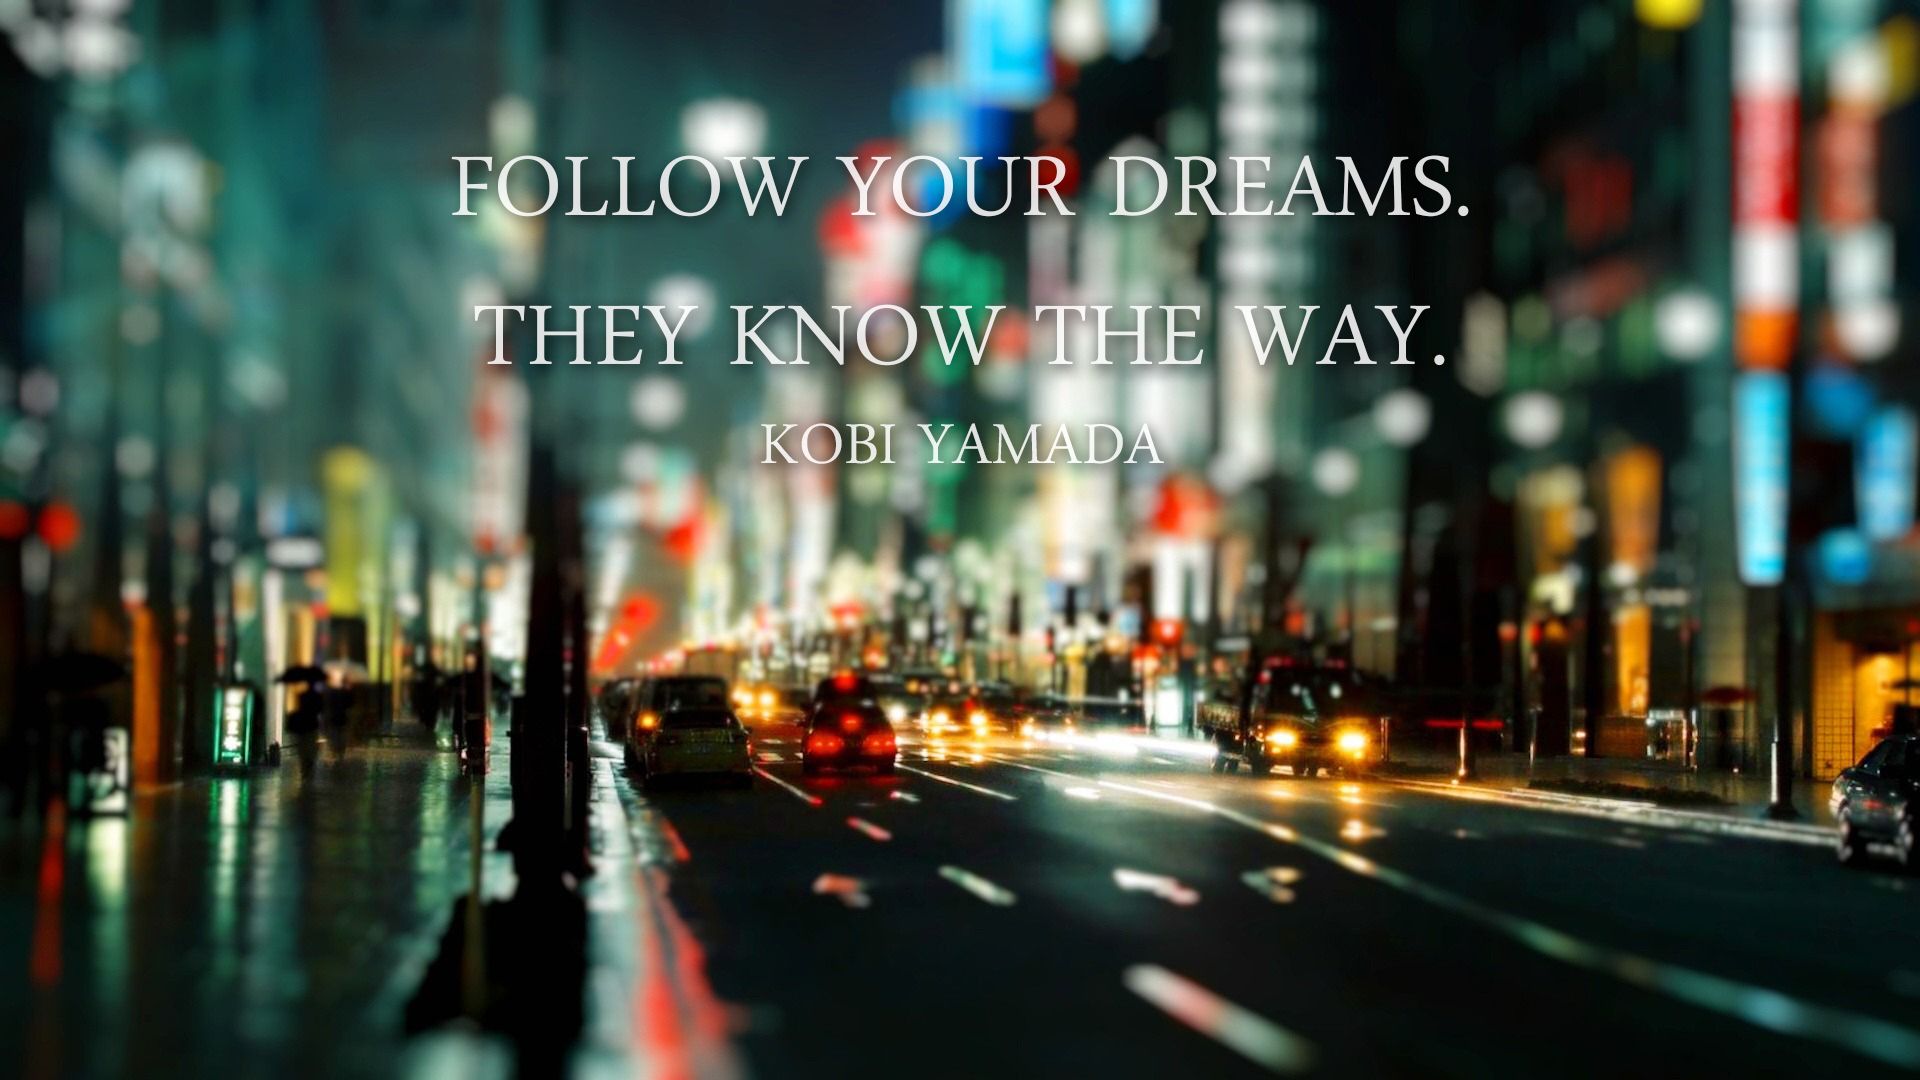 Dreams Quotes - City Lights , HD Wallpaper & Backgrounds